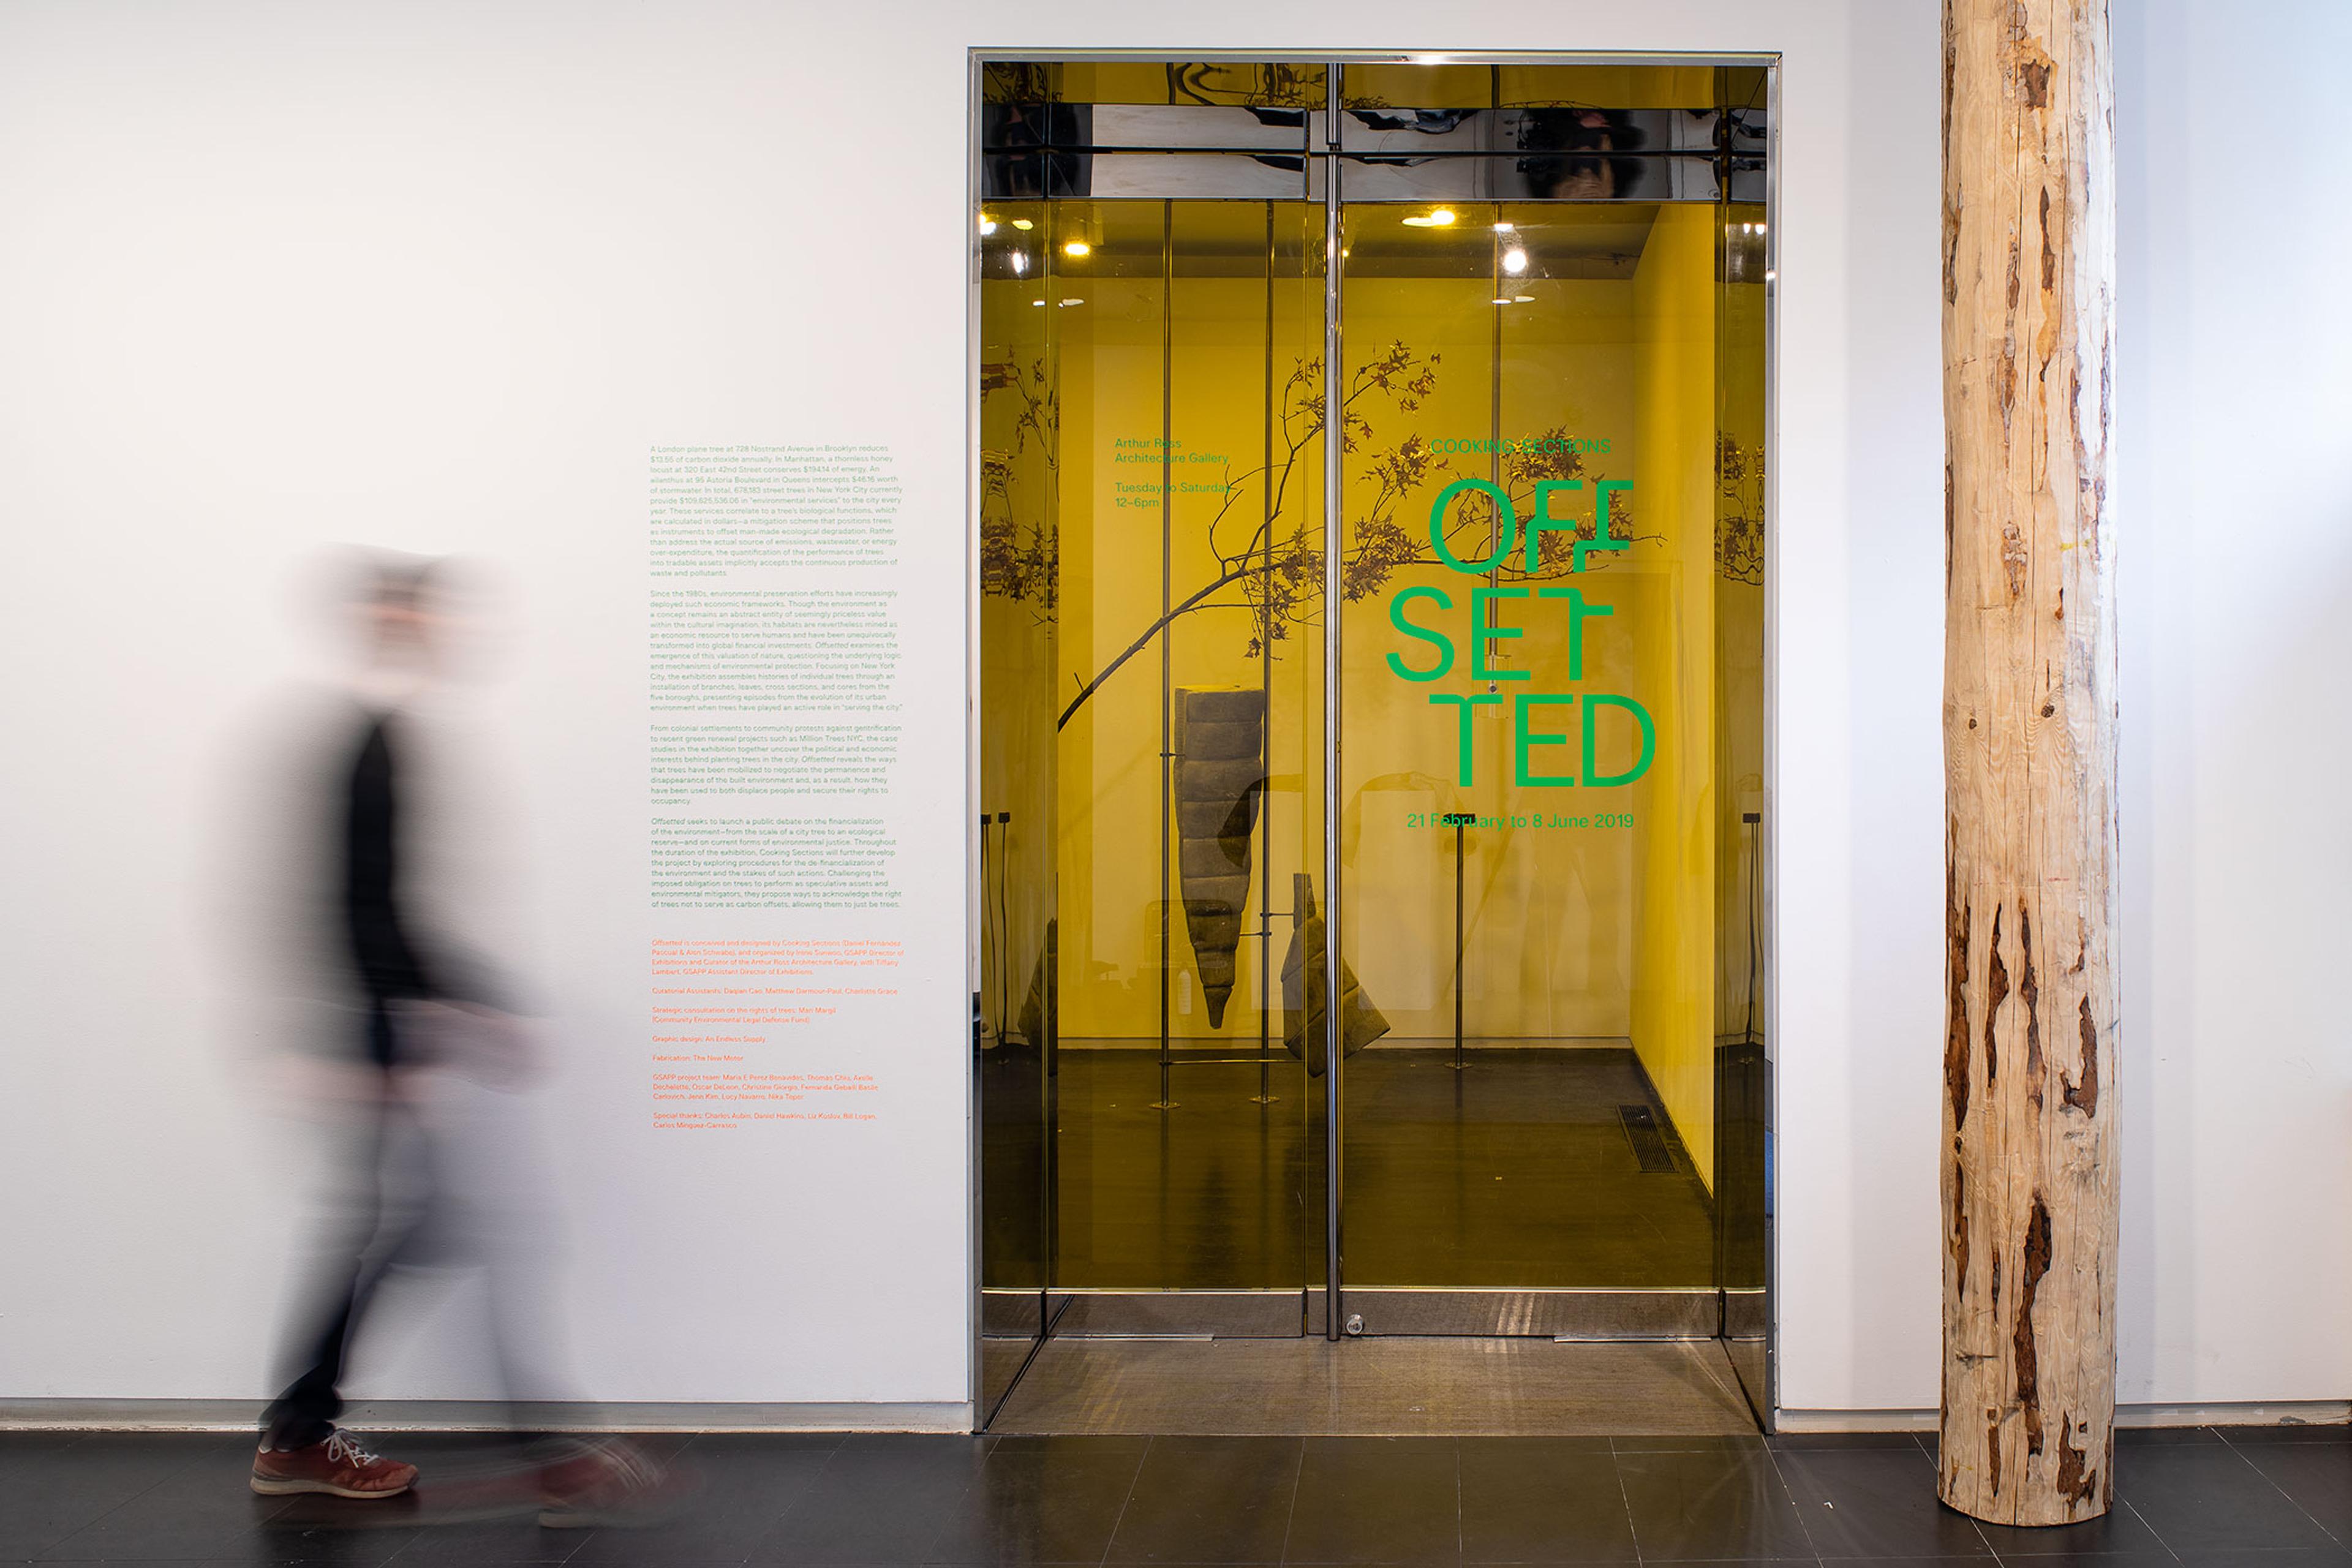 Photograph of interior exhibition vinyl. The title 'Offsetted' in green cut vinyl on glass door to gallery and green interpretation text on a white wall next to the door.